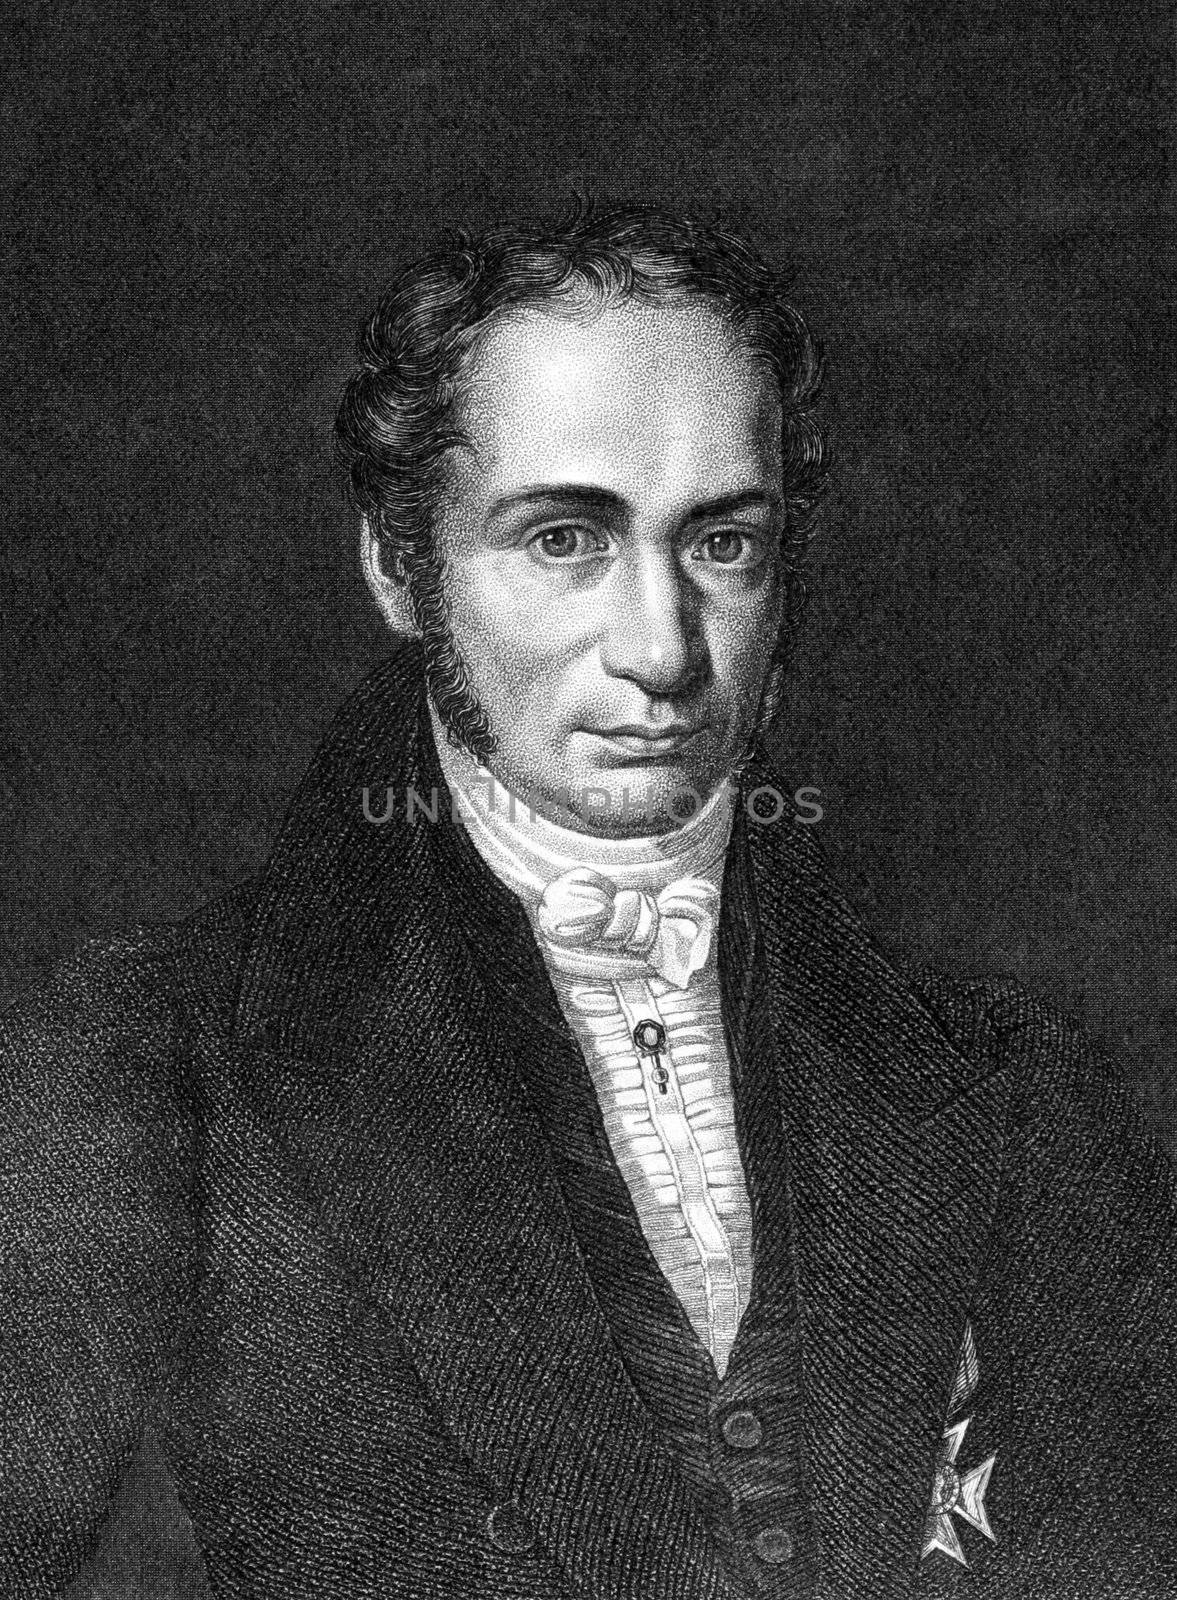 Ernst-Wilhelm Arnoldi (1778-1841) on engraving from 1859. German merchant from Gotha and father of the German insurance industry. Engraved by unknown artist and published in Meyers Konversations-Lexikon, Germany,1859.